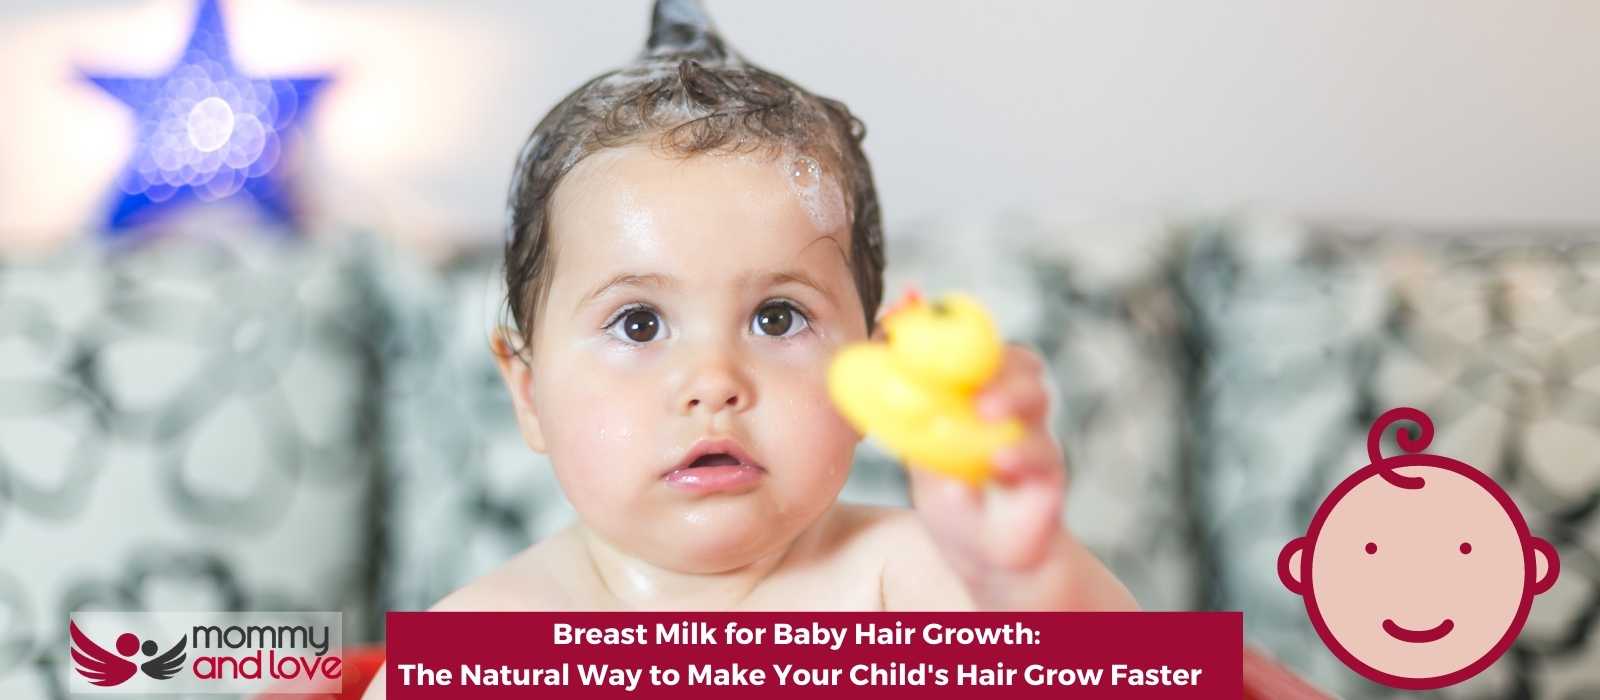 Breast Milk for Baby Hair Growth The Natural Way to Make Your Child's Hair Grow Faster